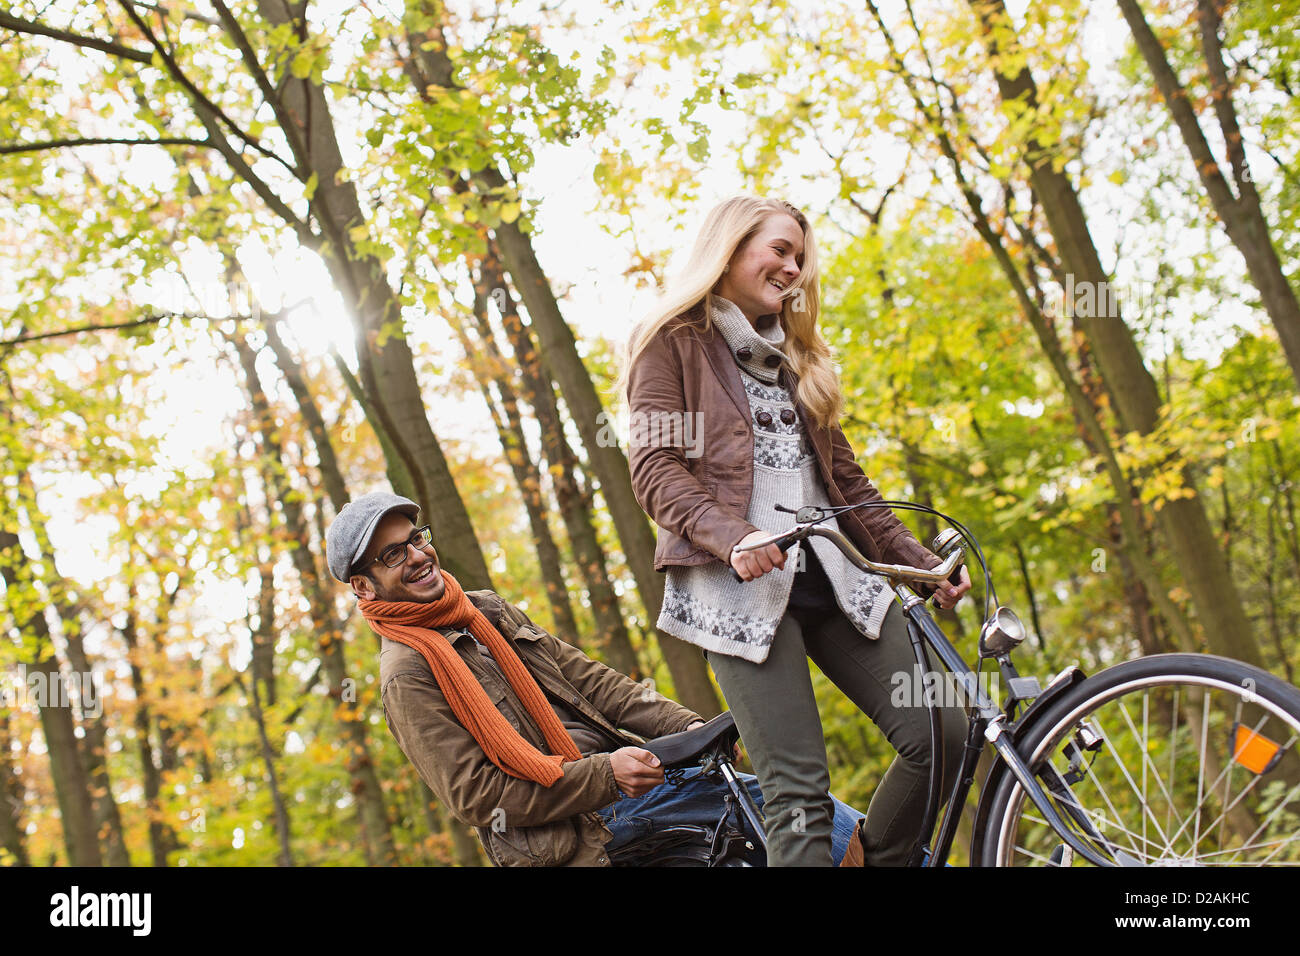 Couple riding bicycle in forest Stock Photo